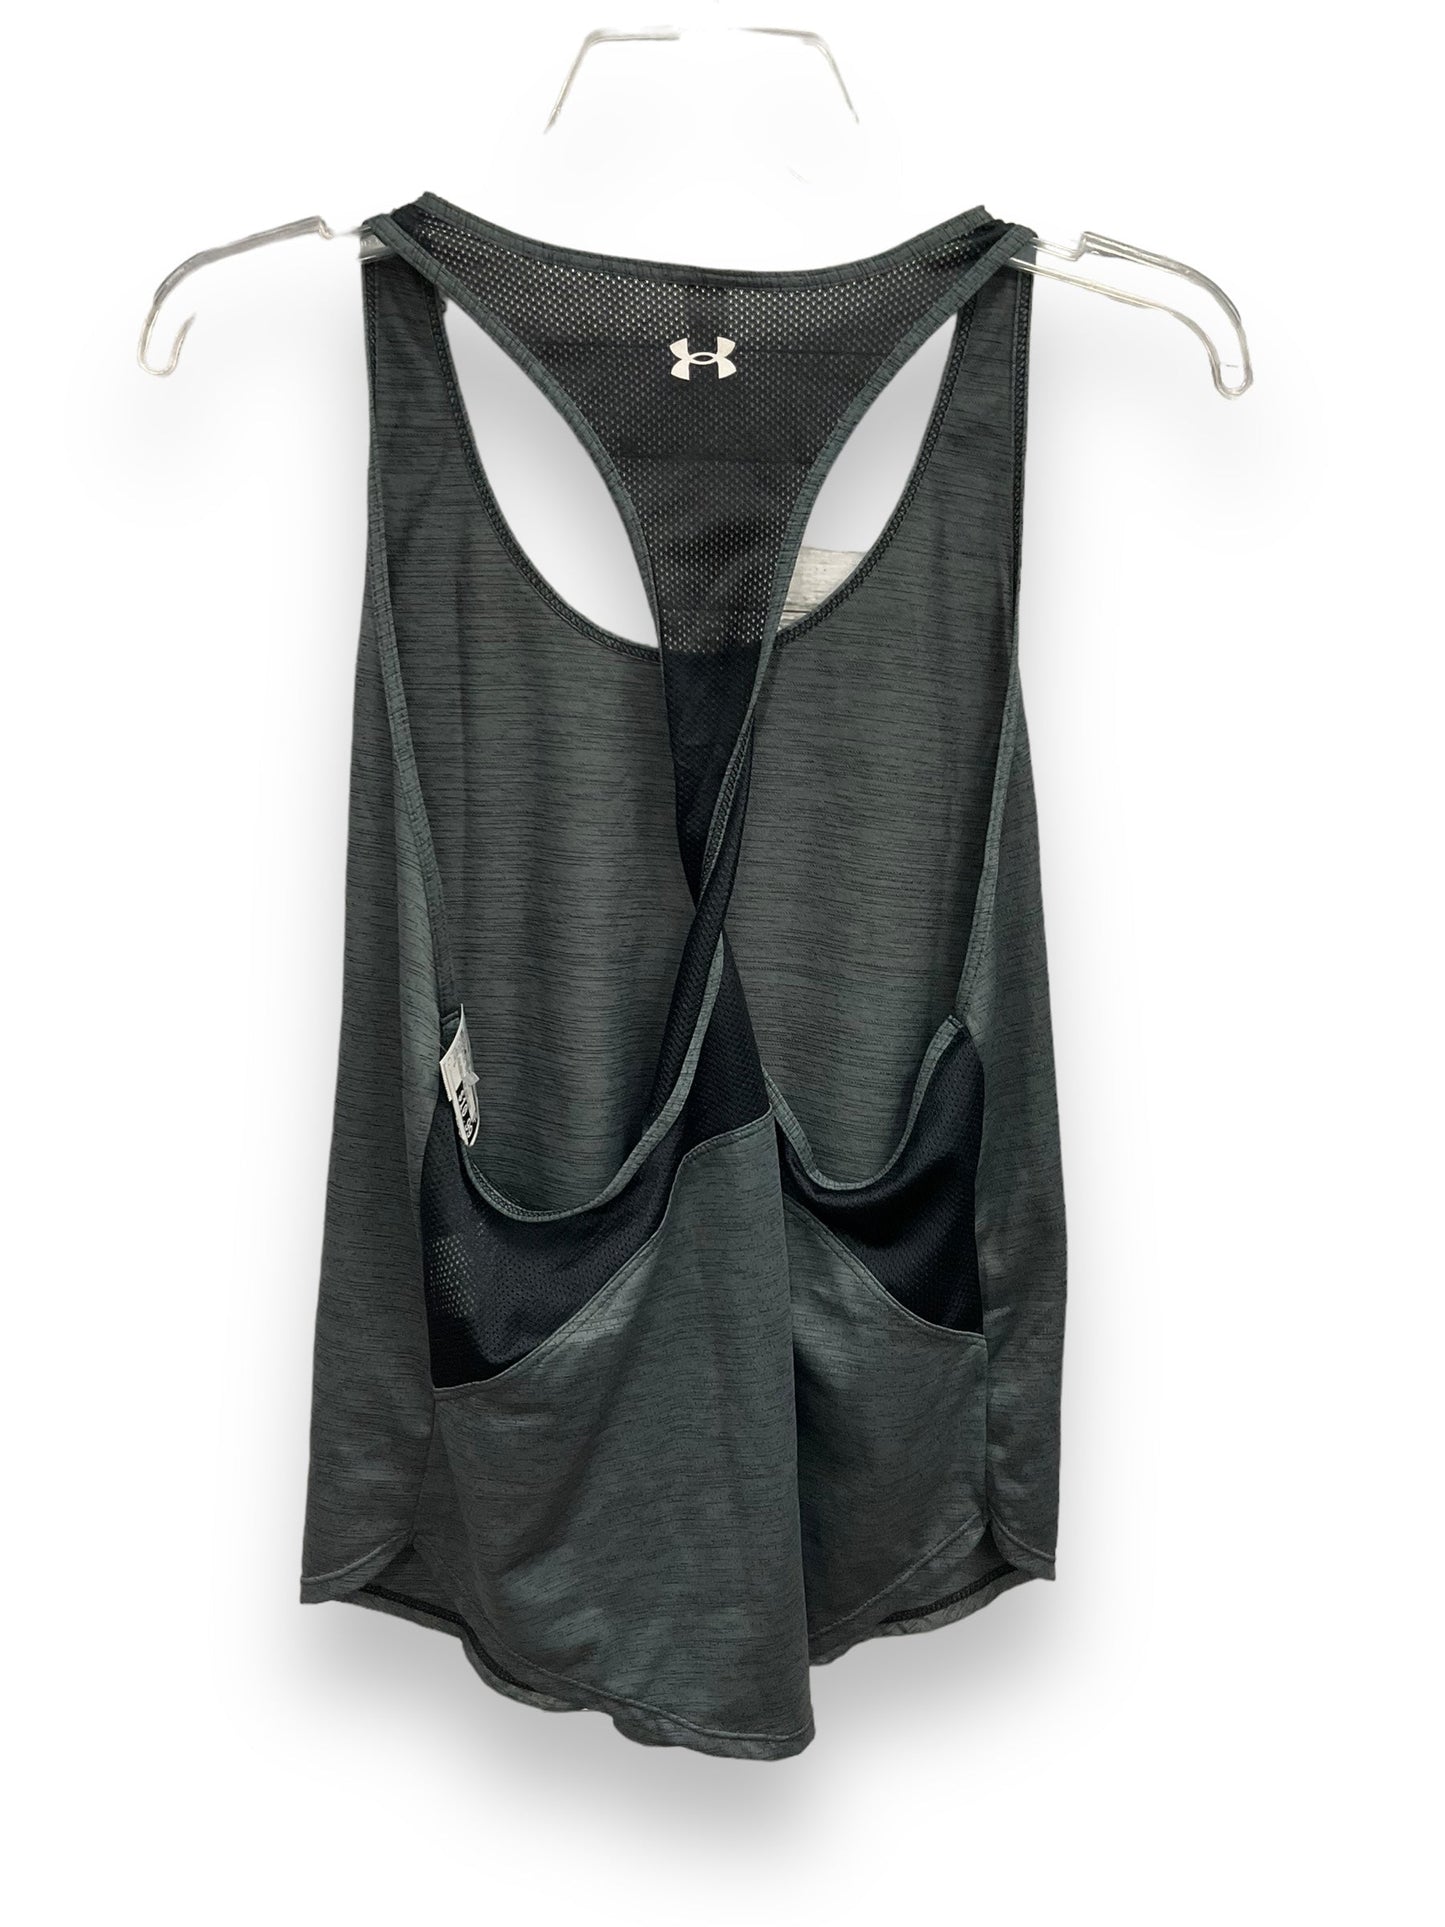 Grey Athletic Tank Top Under Armour, Size L